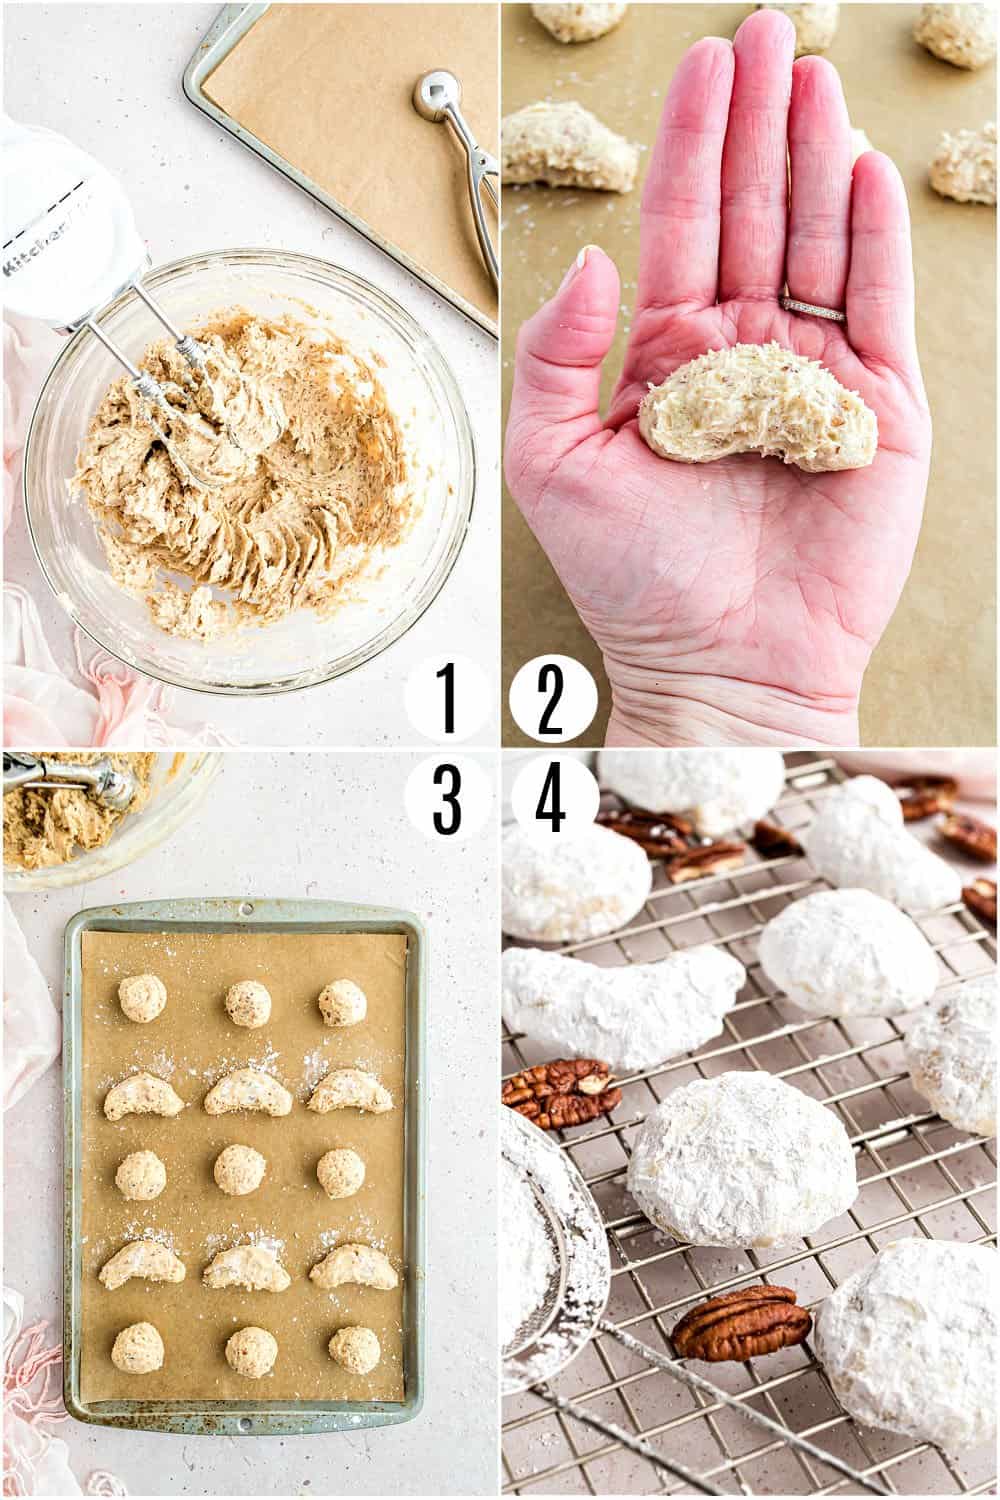 Step by step photos showing how to make snowball cookies.